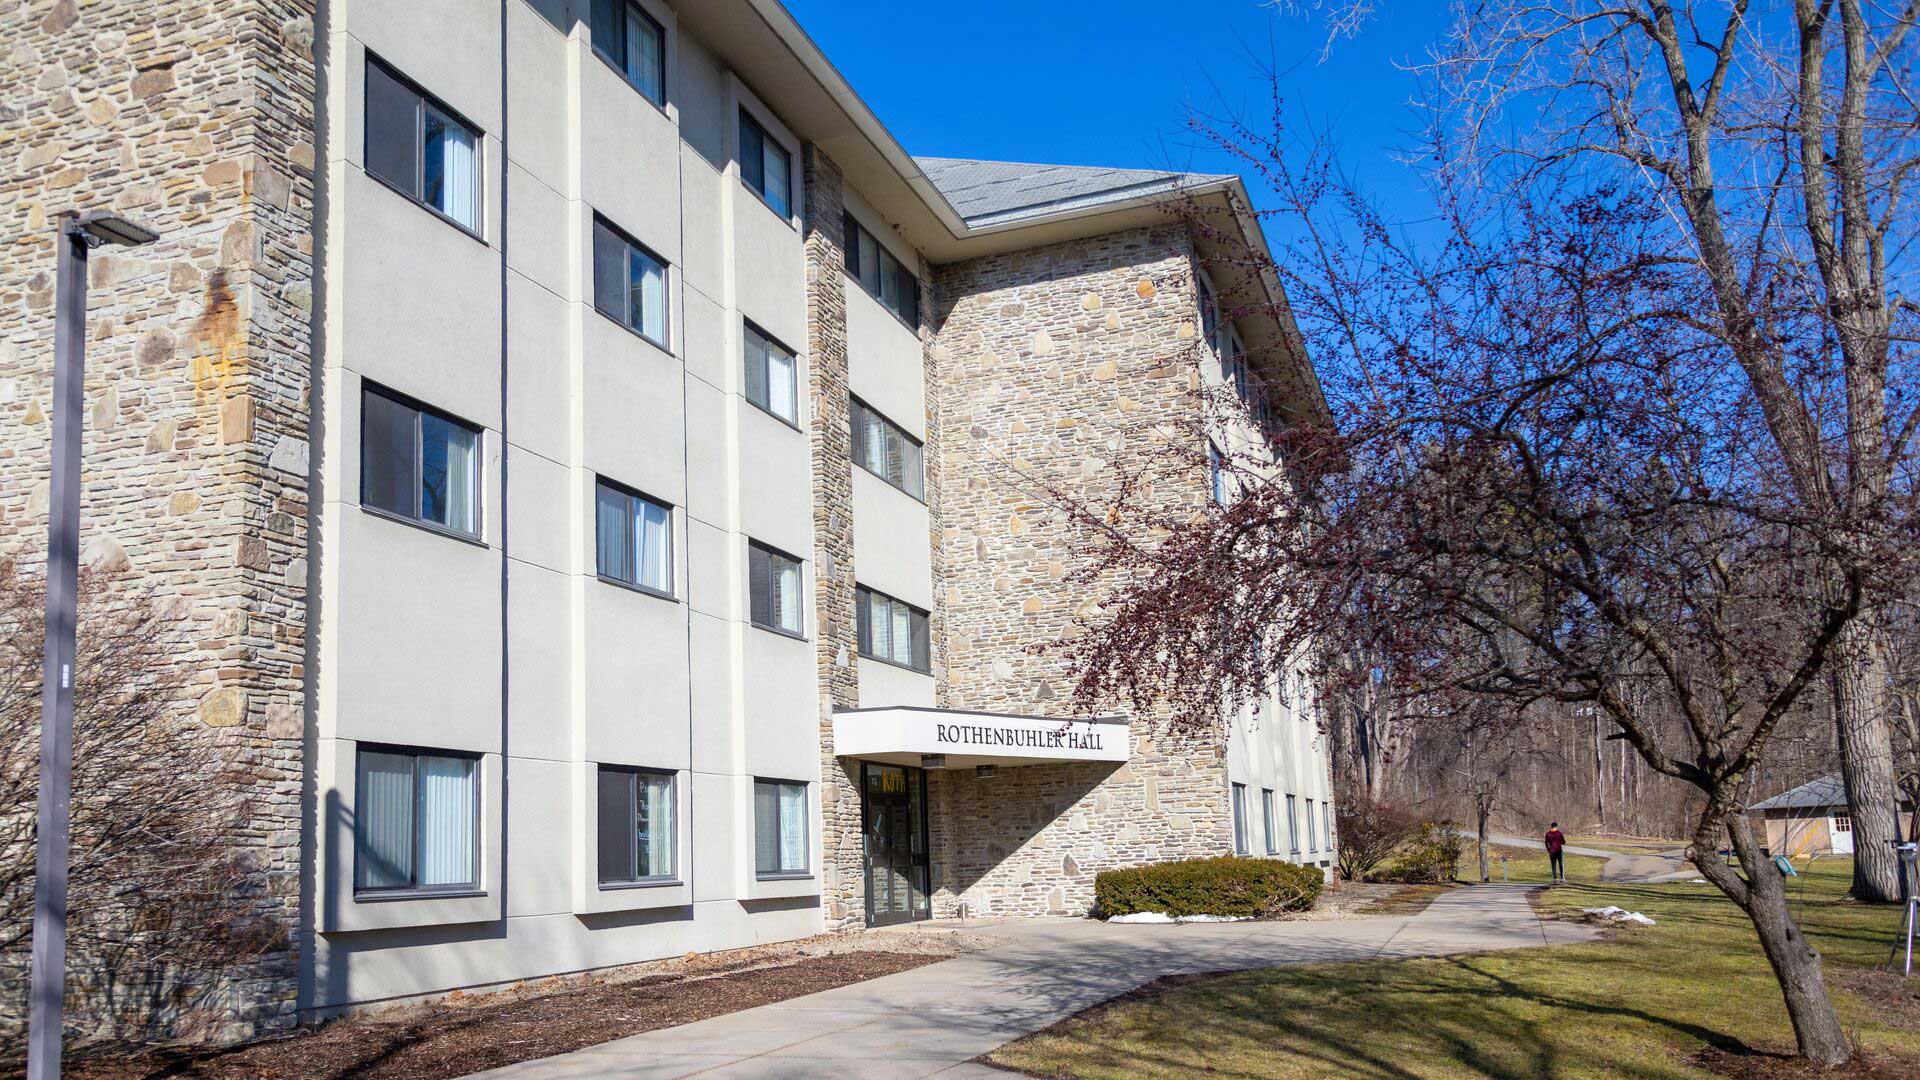 Exterior view of Rothenbuhler Hall at Houghton University.